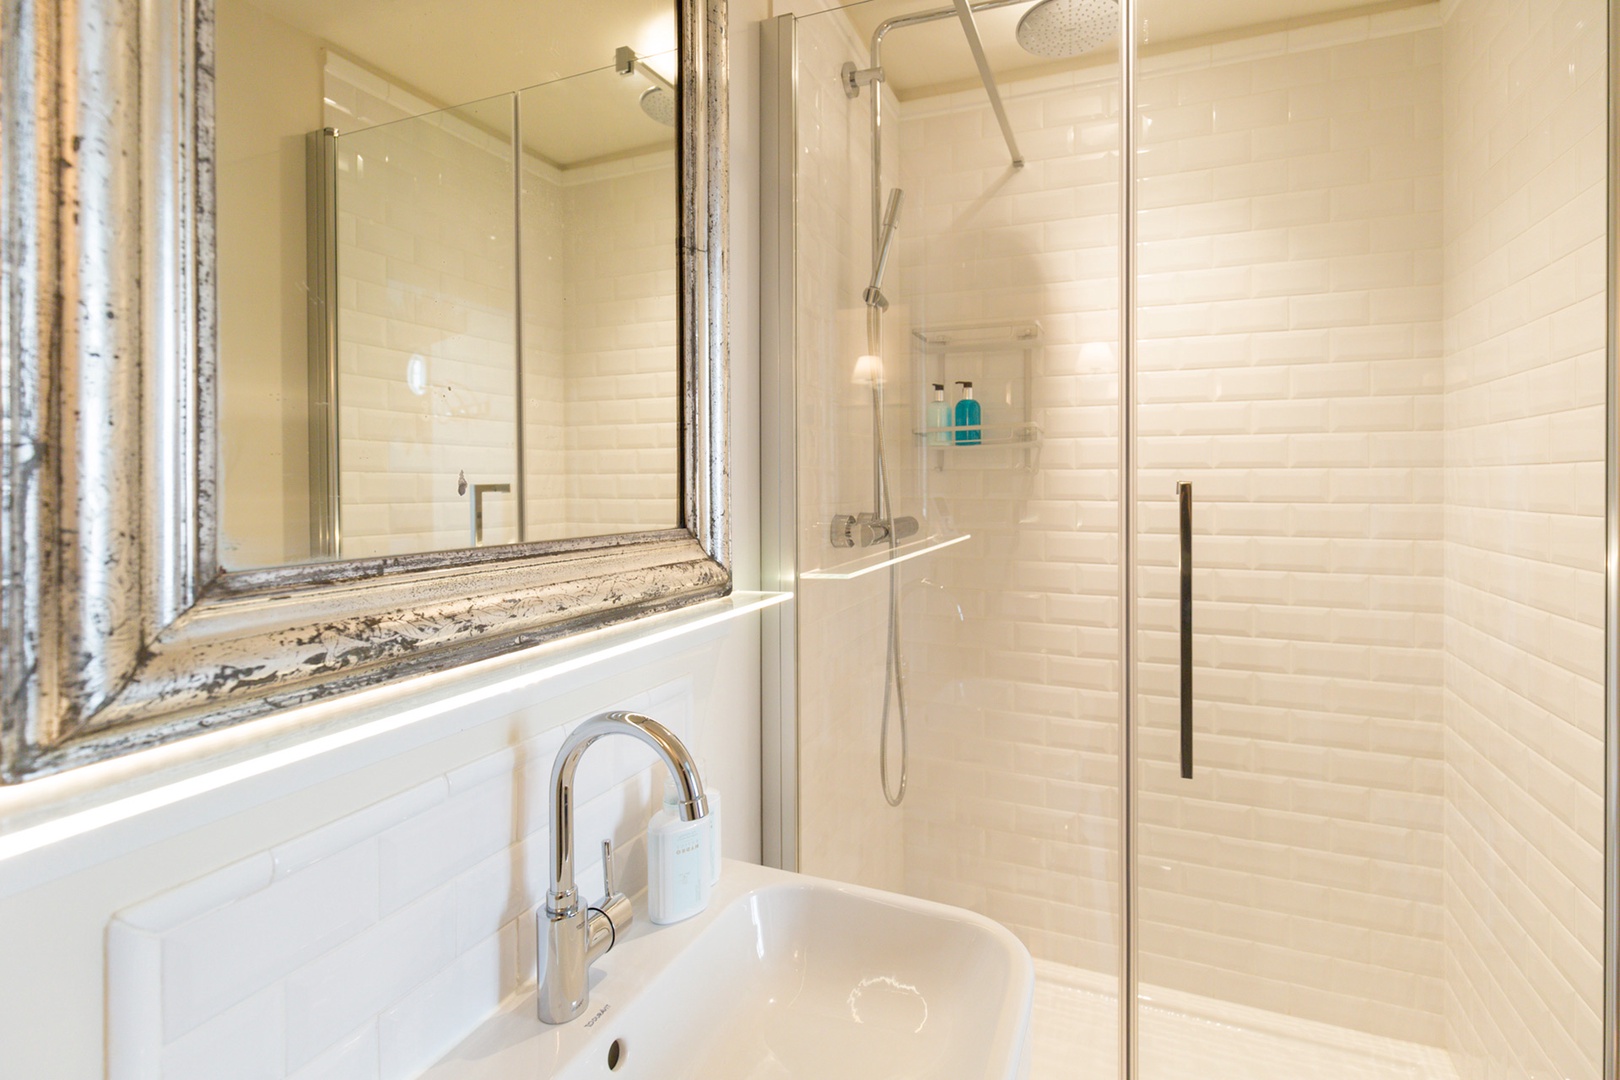 Start your day with an energizing shower.